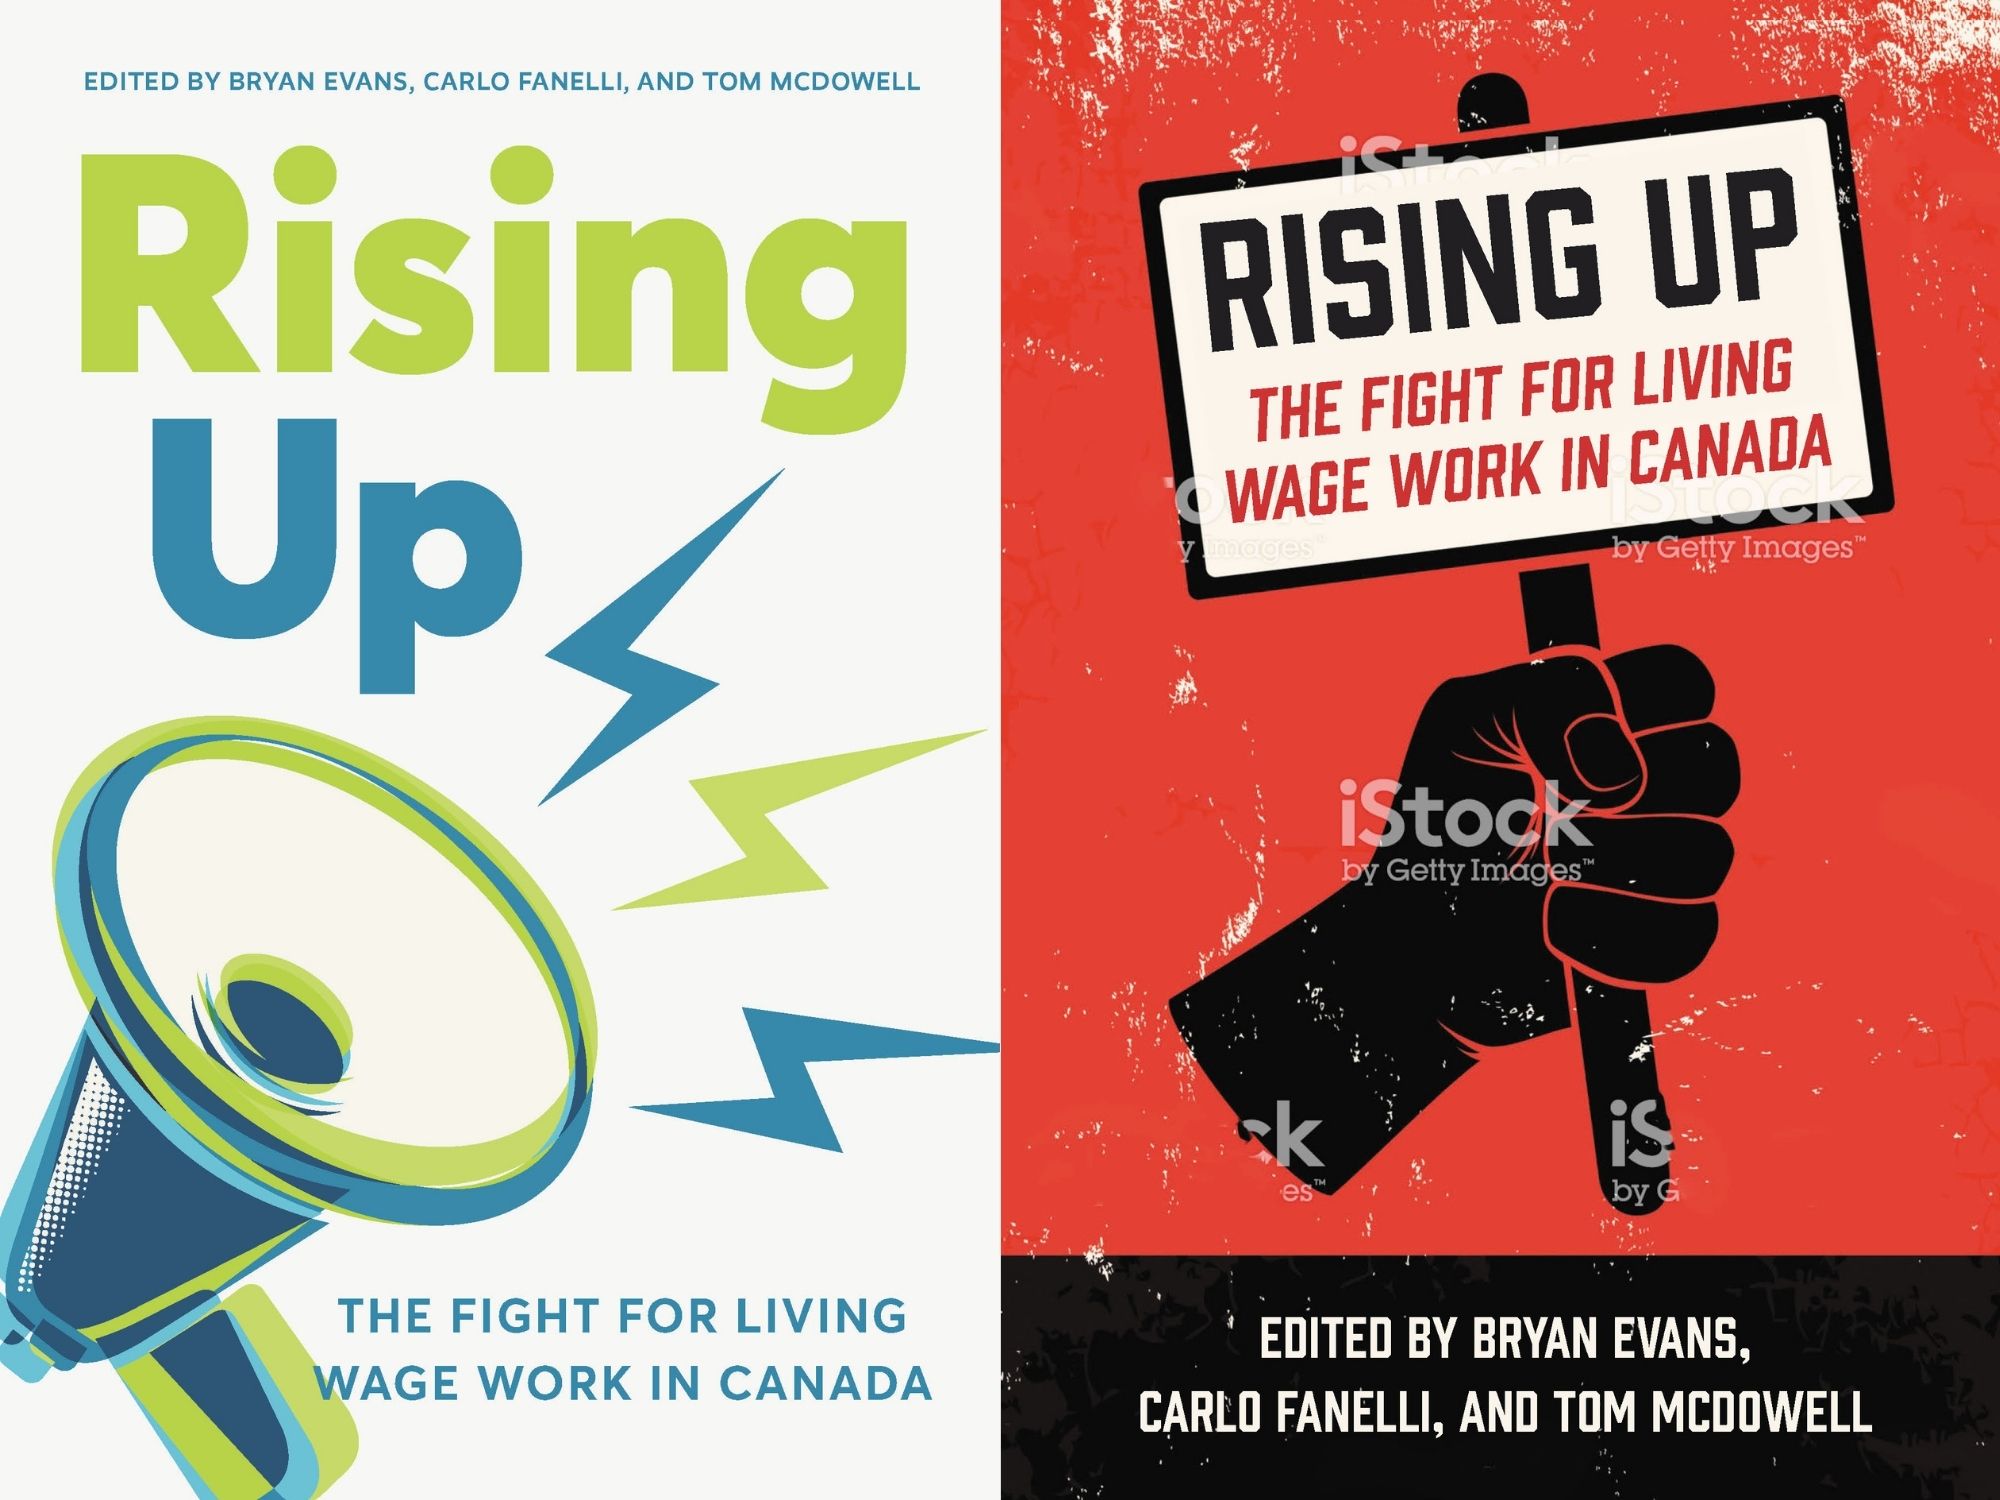 Two mockups for Rising Up, including activist themes. One shows a blue and green megaphone on a white backgropund; the other shows a red background with a fist holding a sign.